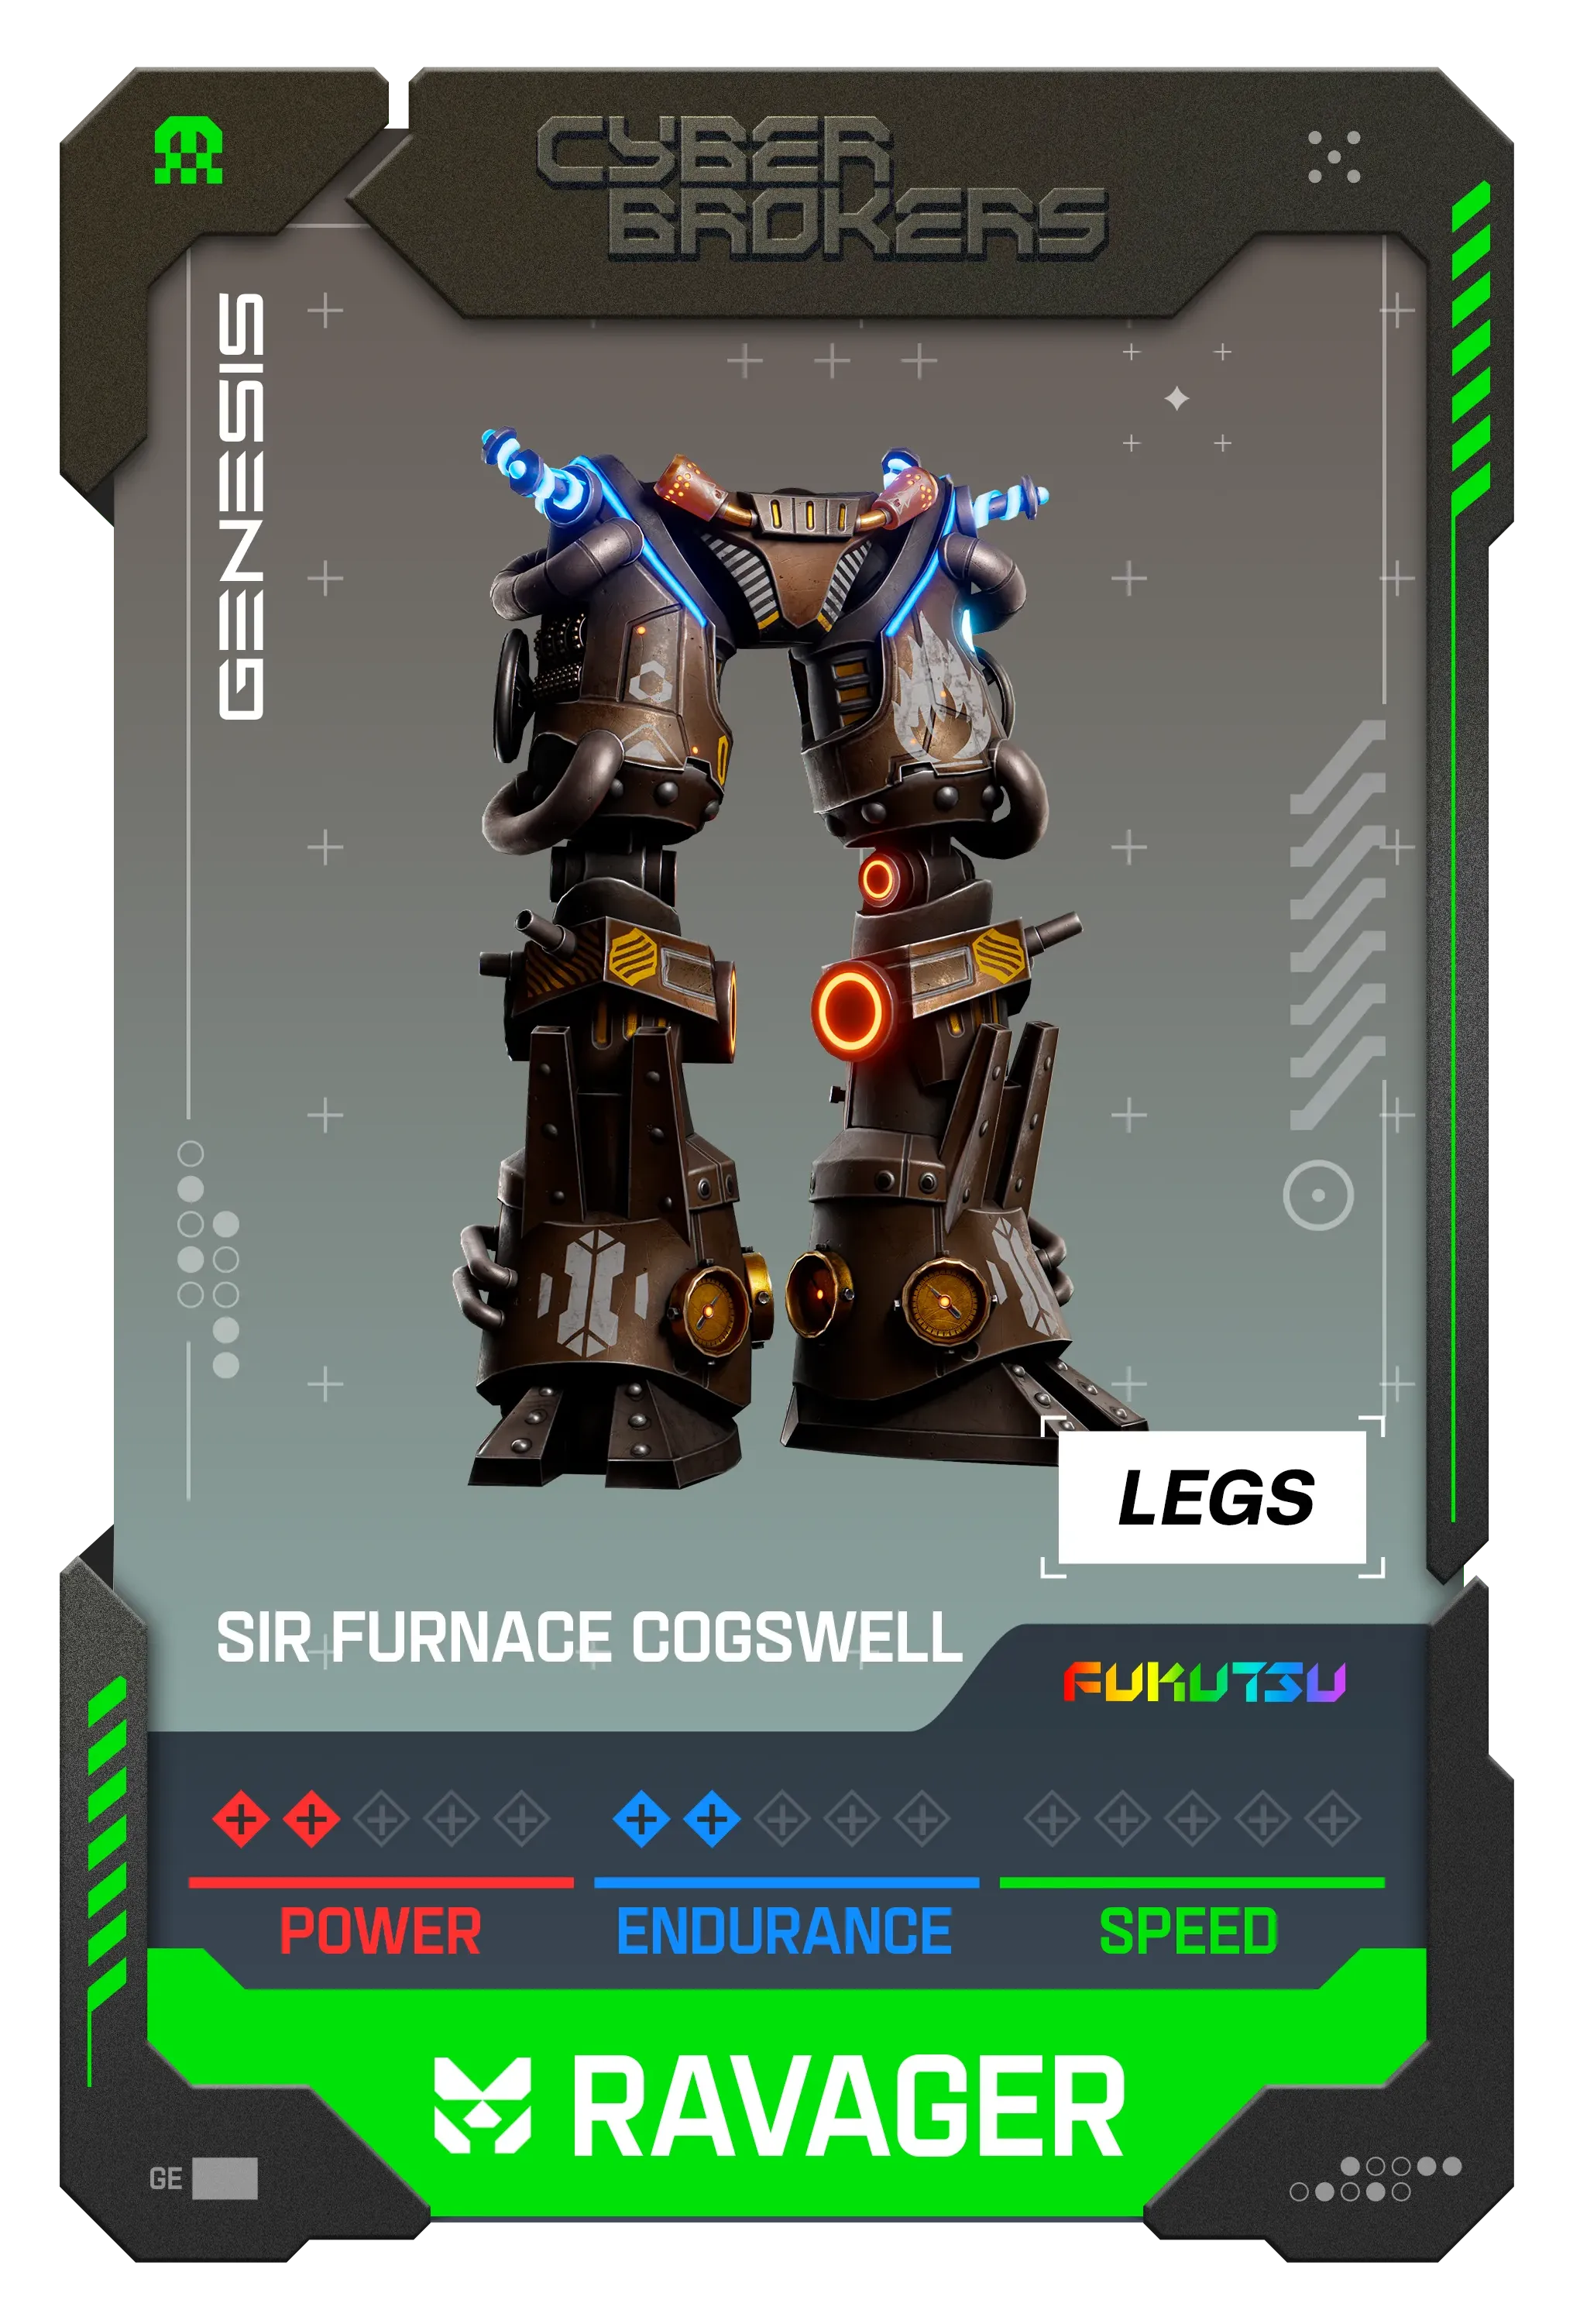 Sir Furnace Cogswell Ravager Legs